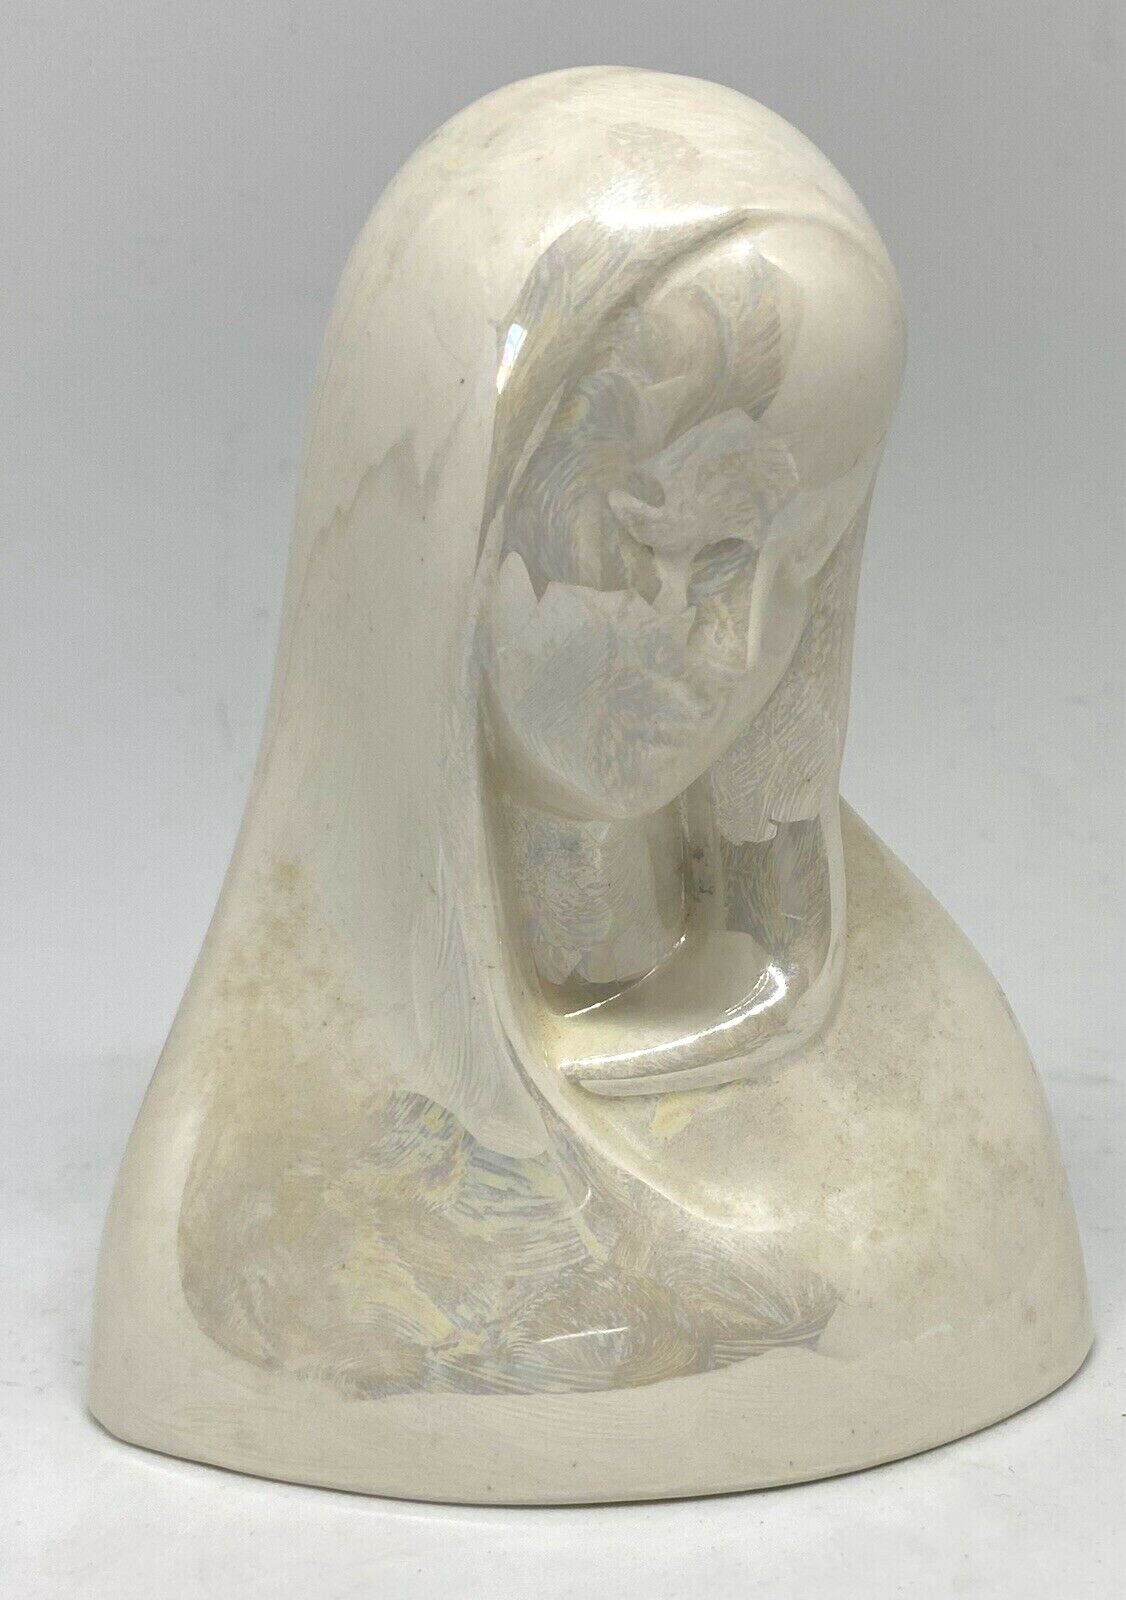 VINTAGE PORCELAIN MOTHER MARY FIGURINE 5 INCHES TALL DONALD GARDNER RELIGIOUS